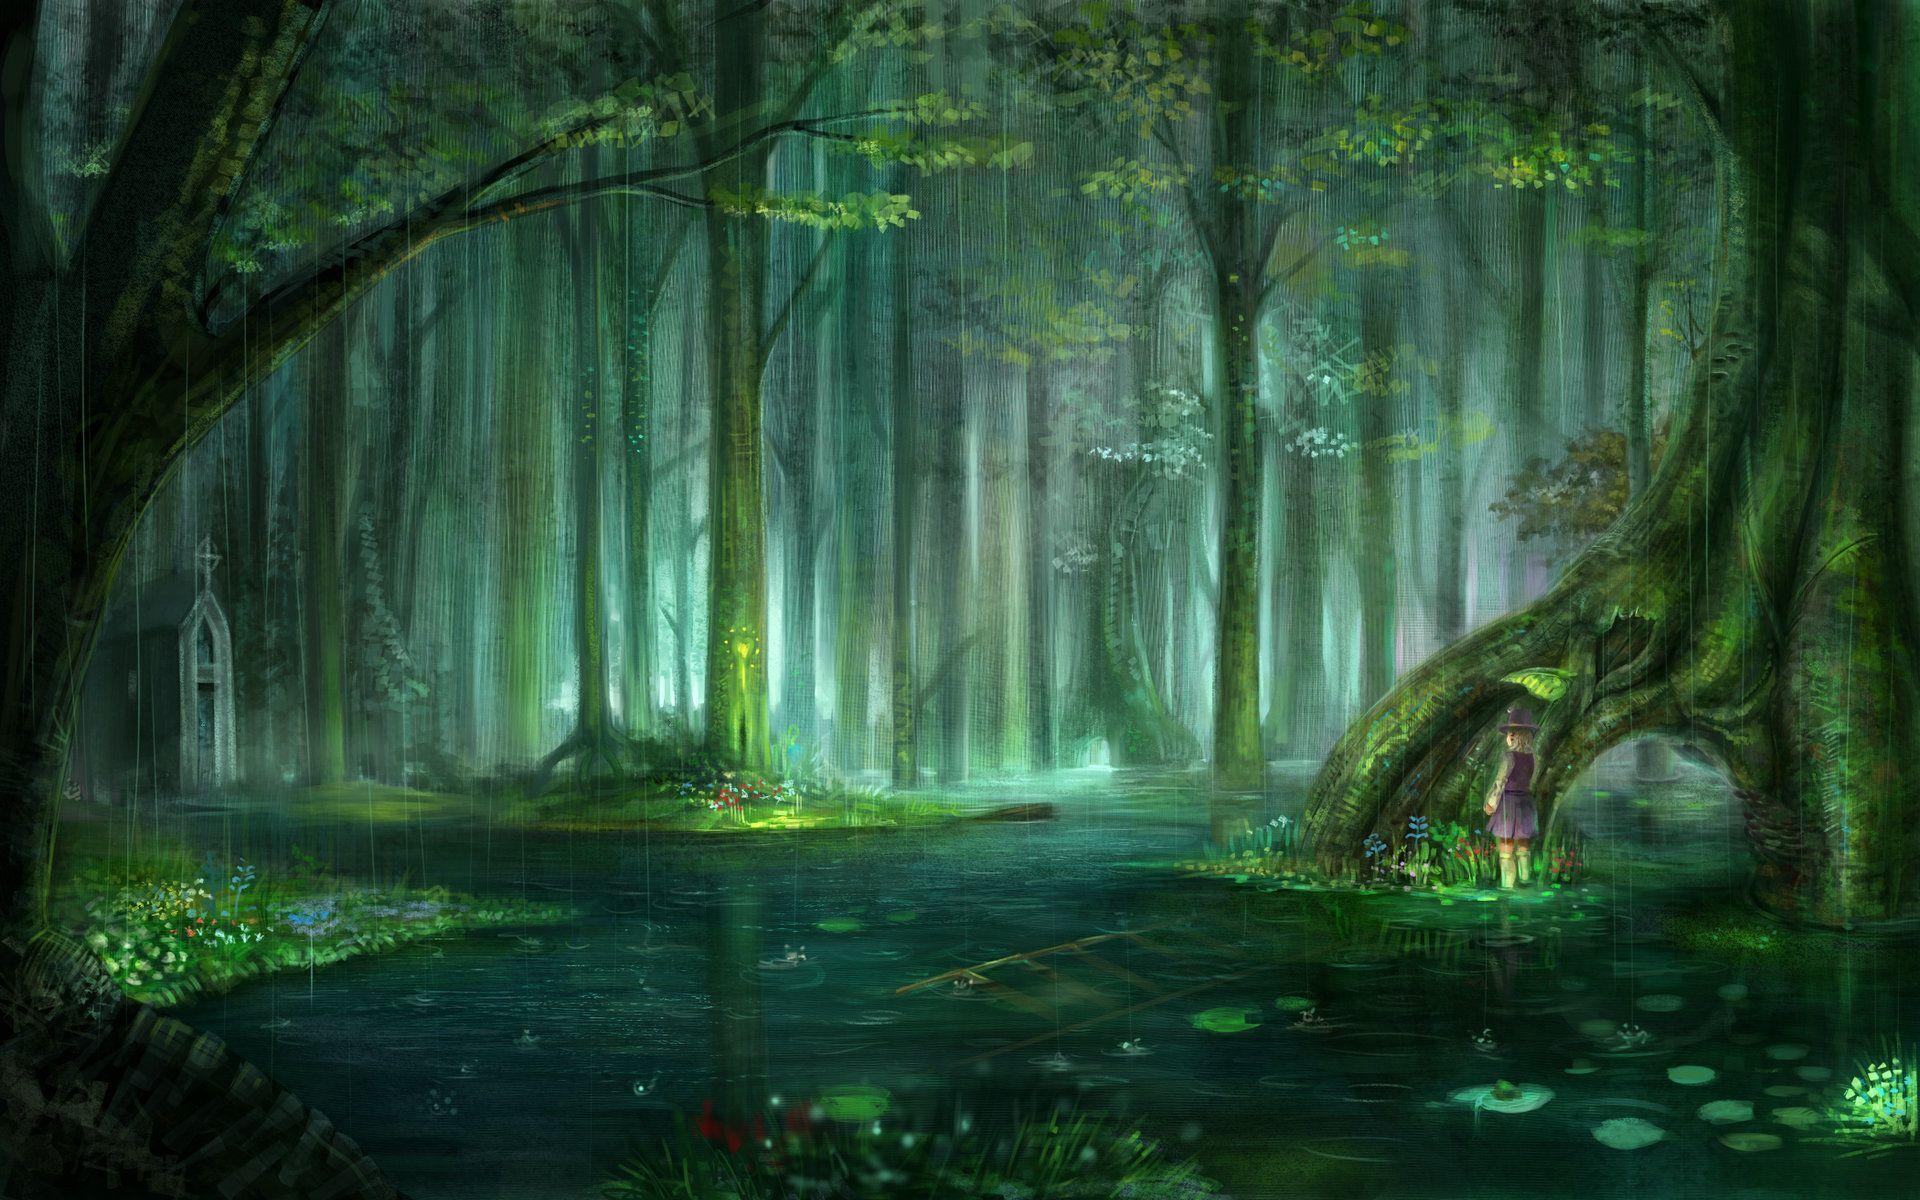 Wallpaper For > Enchanted Forest Background Tumblr